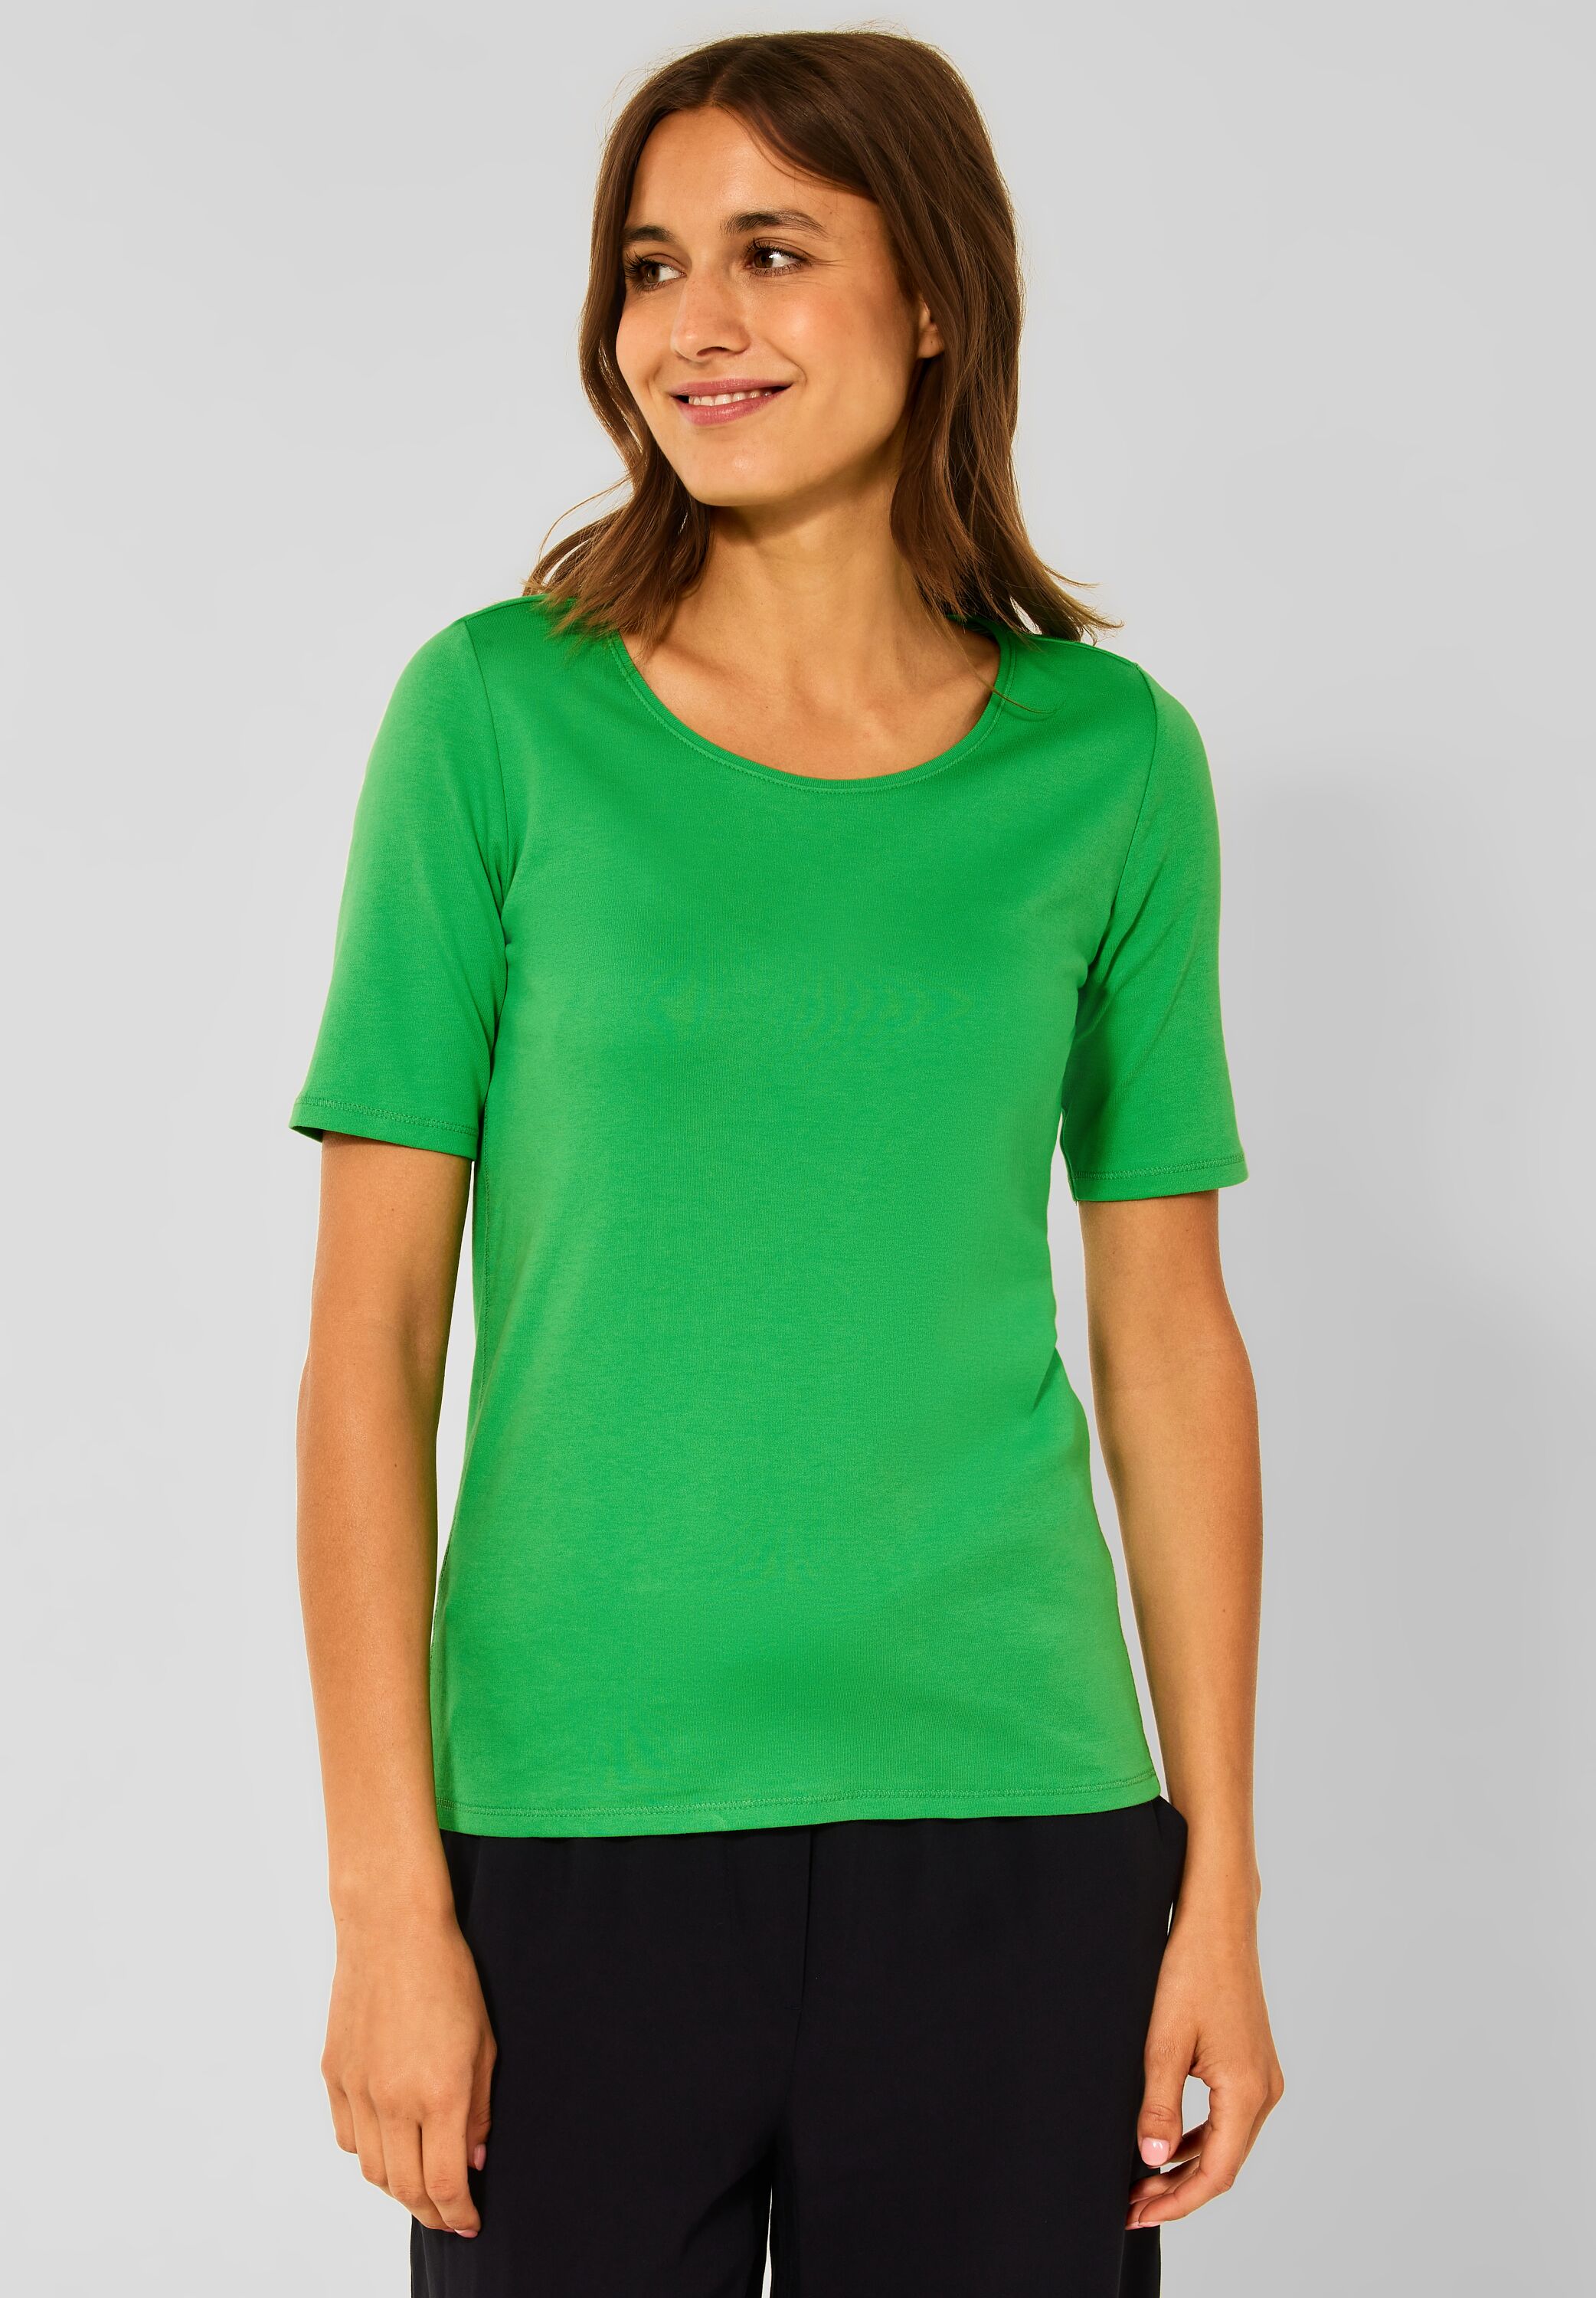 CECIL T-Shirt Lena in Radiant Green im SALE reduziert B317515-13986 -  CONCEPT Mode | T-Shirts